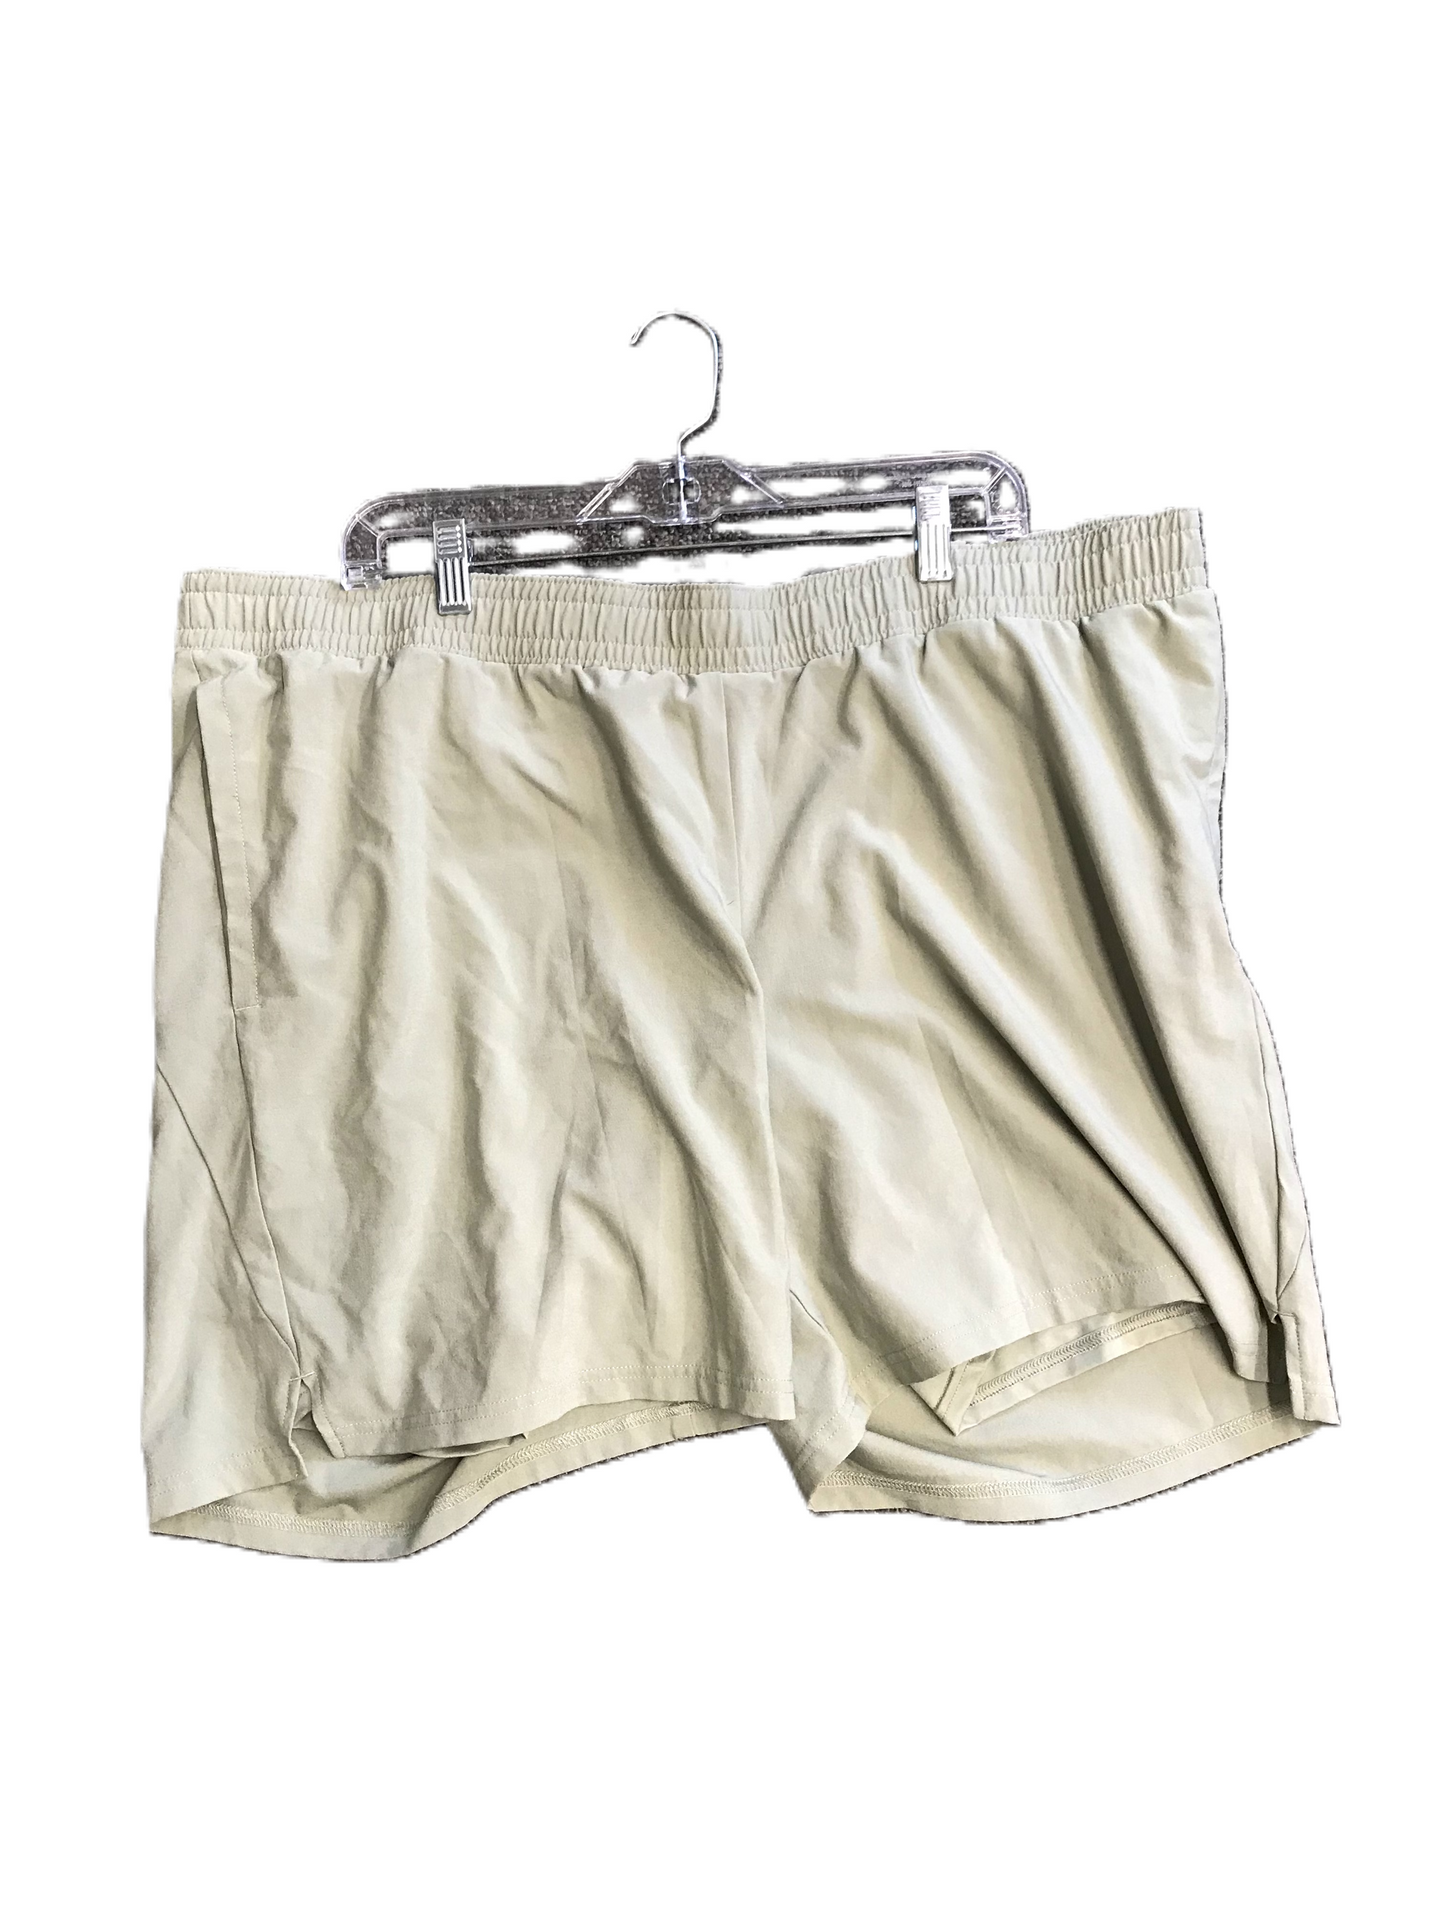 Green Athletic Shorts By All In Motion, Size: 1x